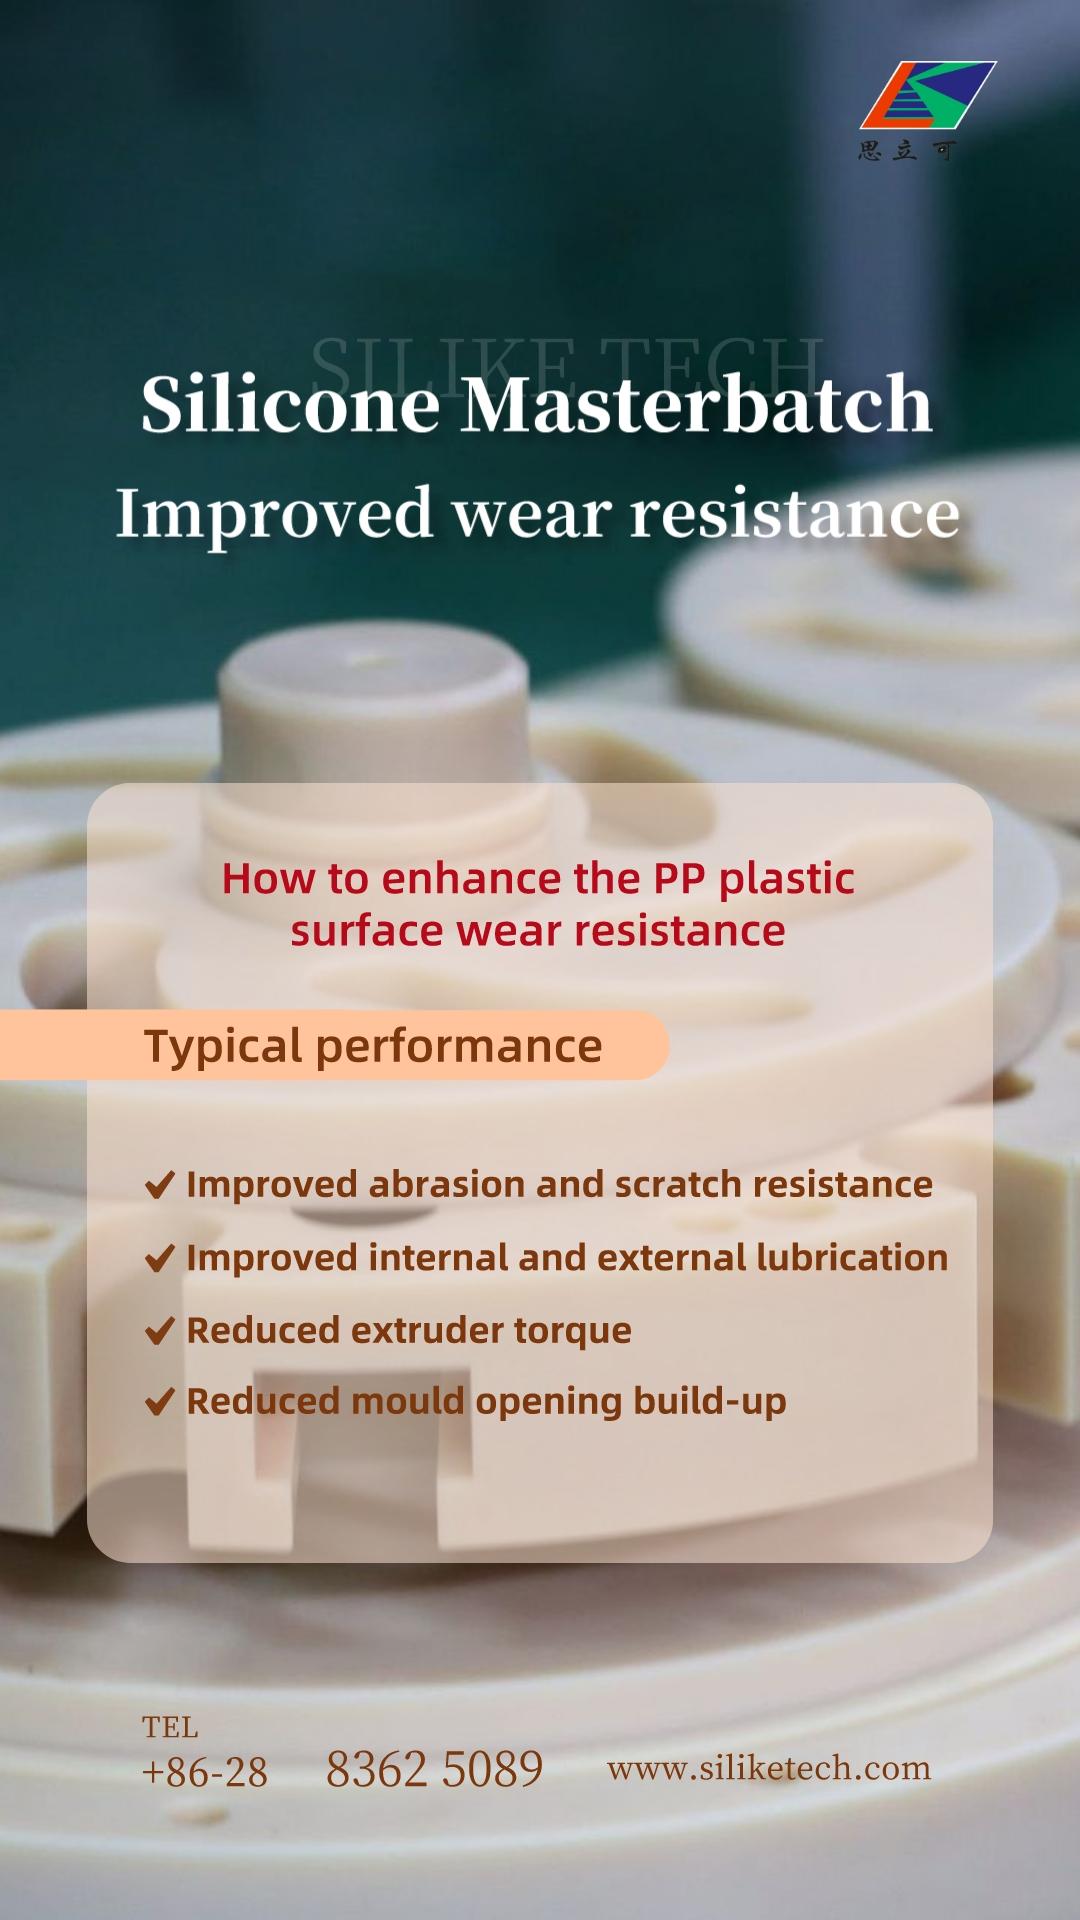 Effective methods to improve the wear resistance of PP plastic surface